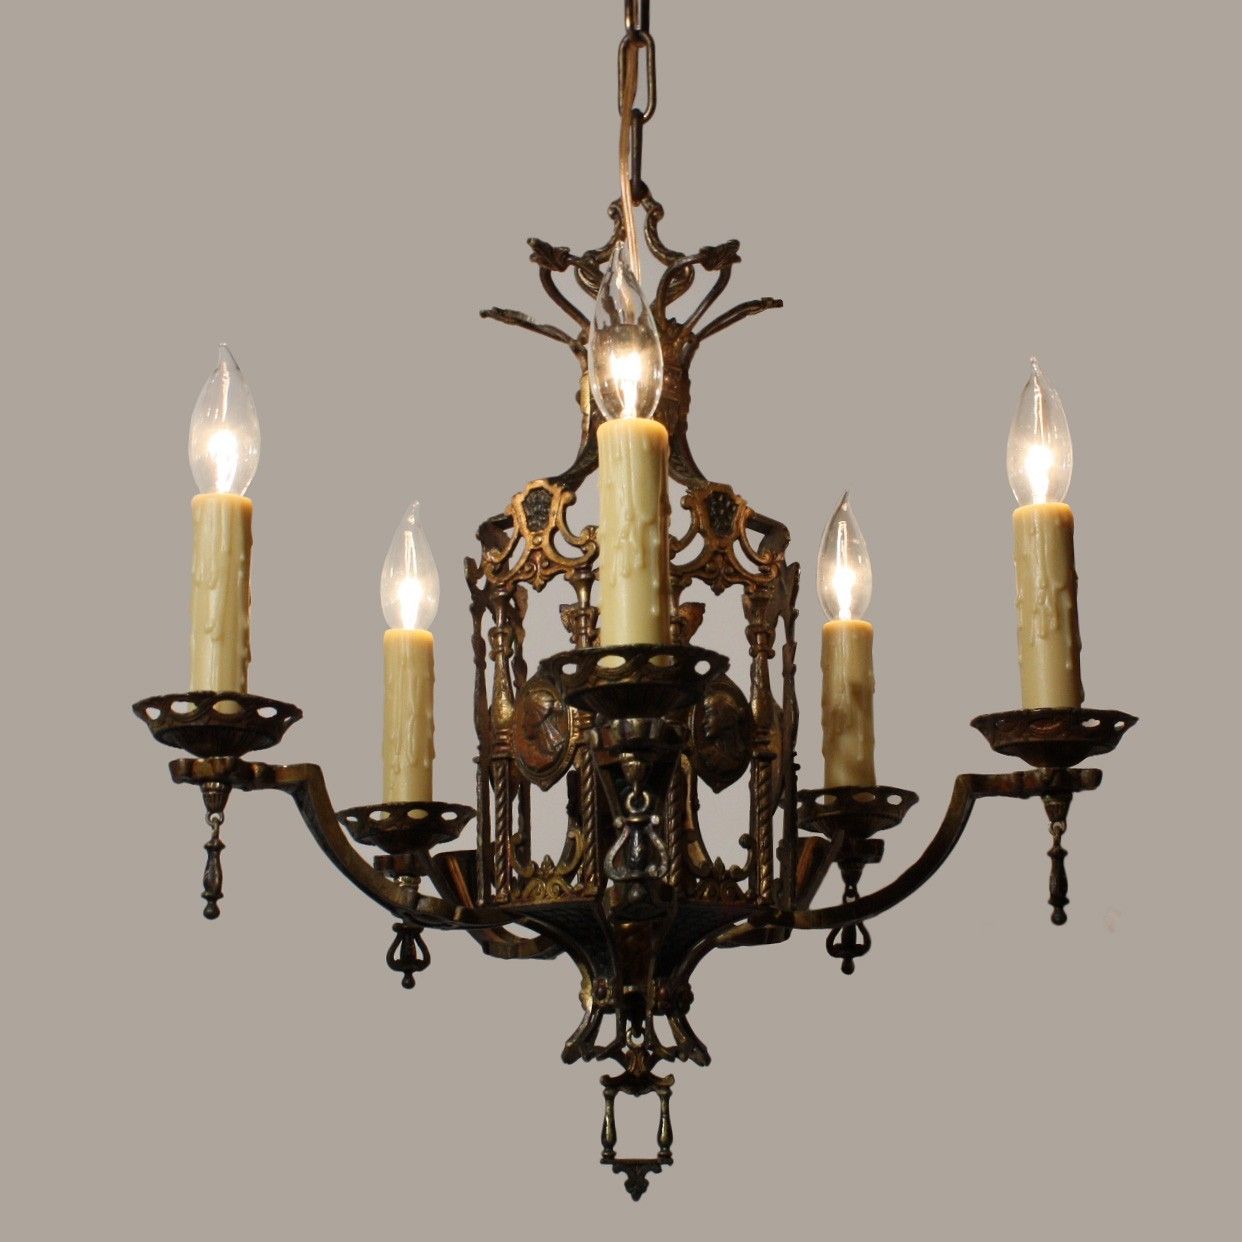 Stunning Antique Egyptian Revival Figural Chandelier With Cameos Inside Egyptian Chandelier (View 3 of 15)